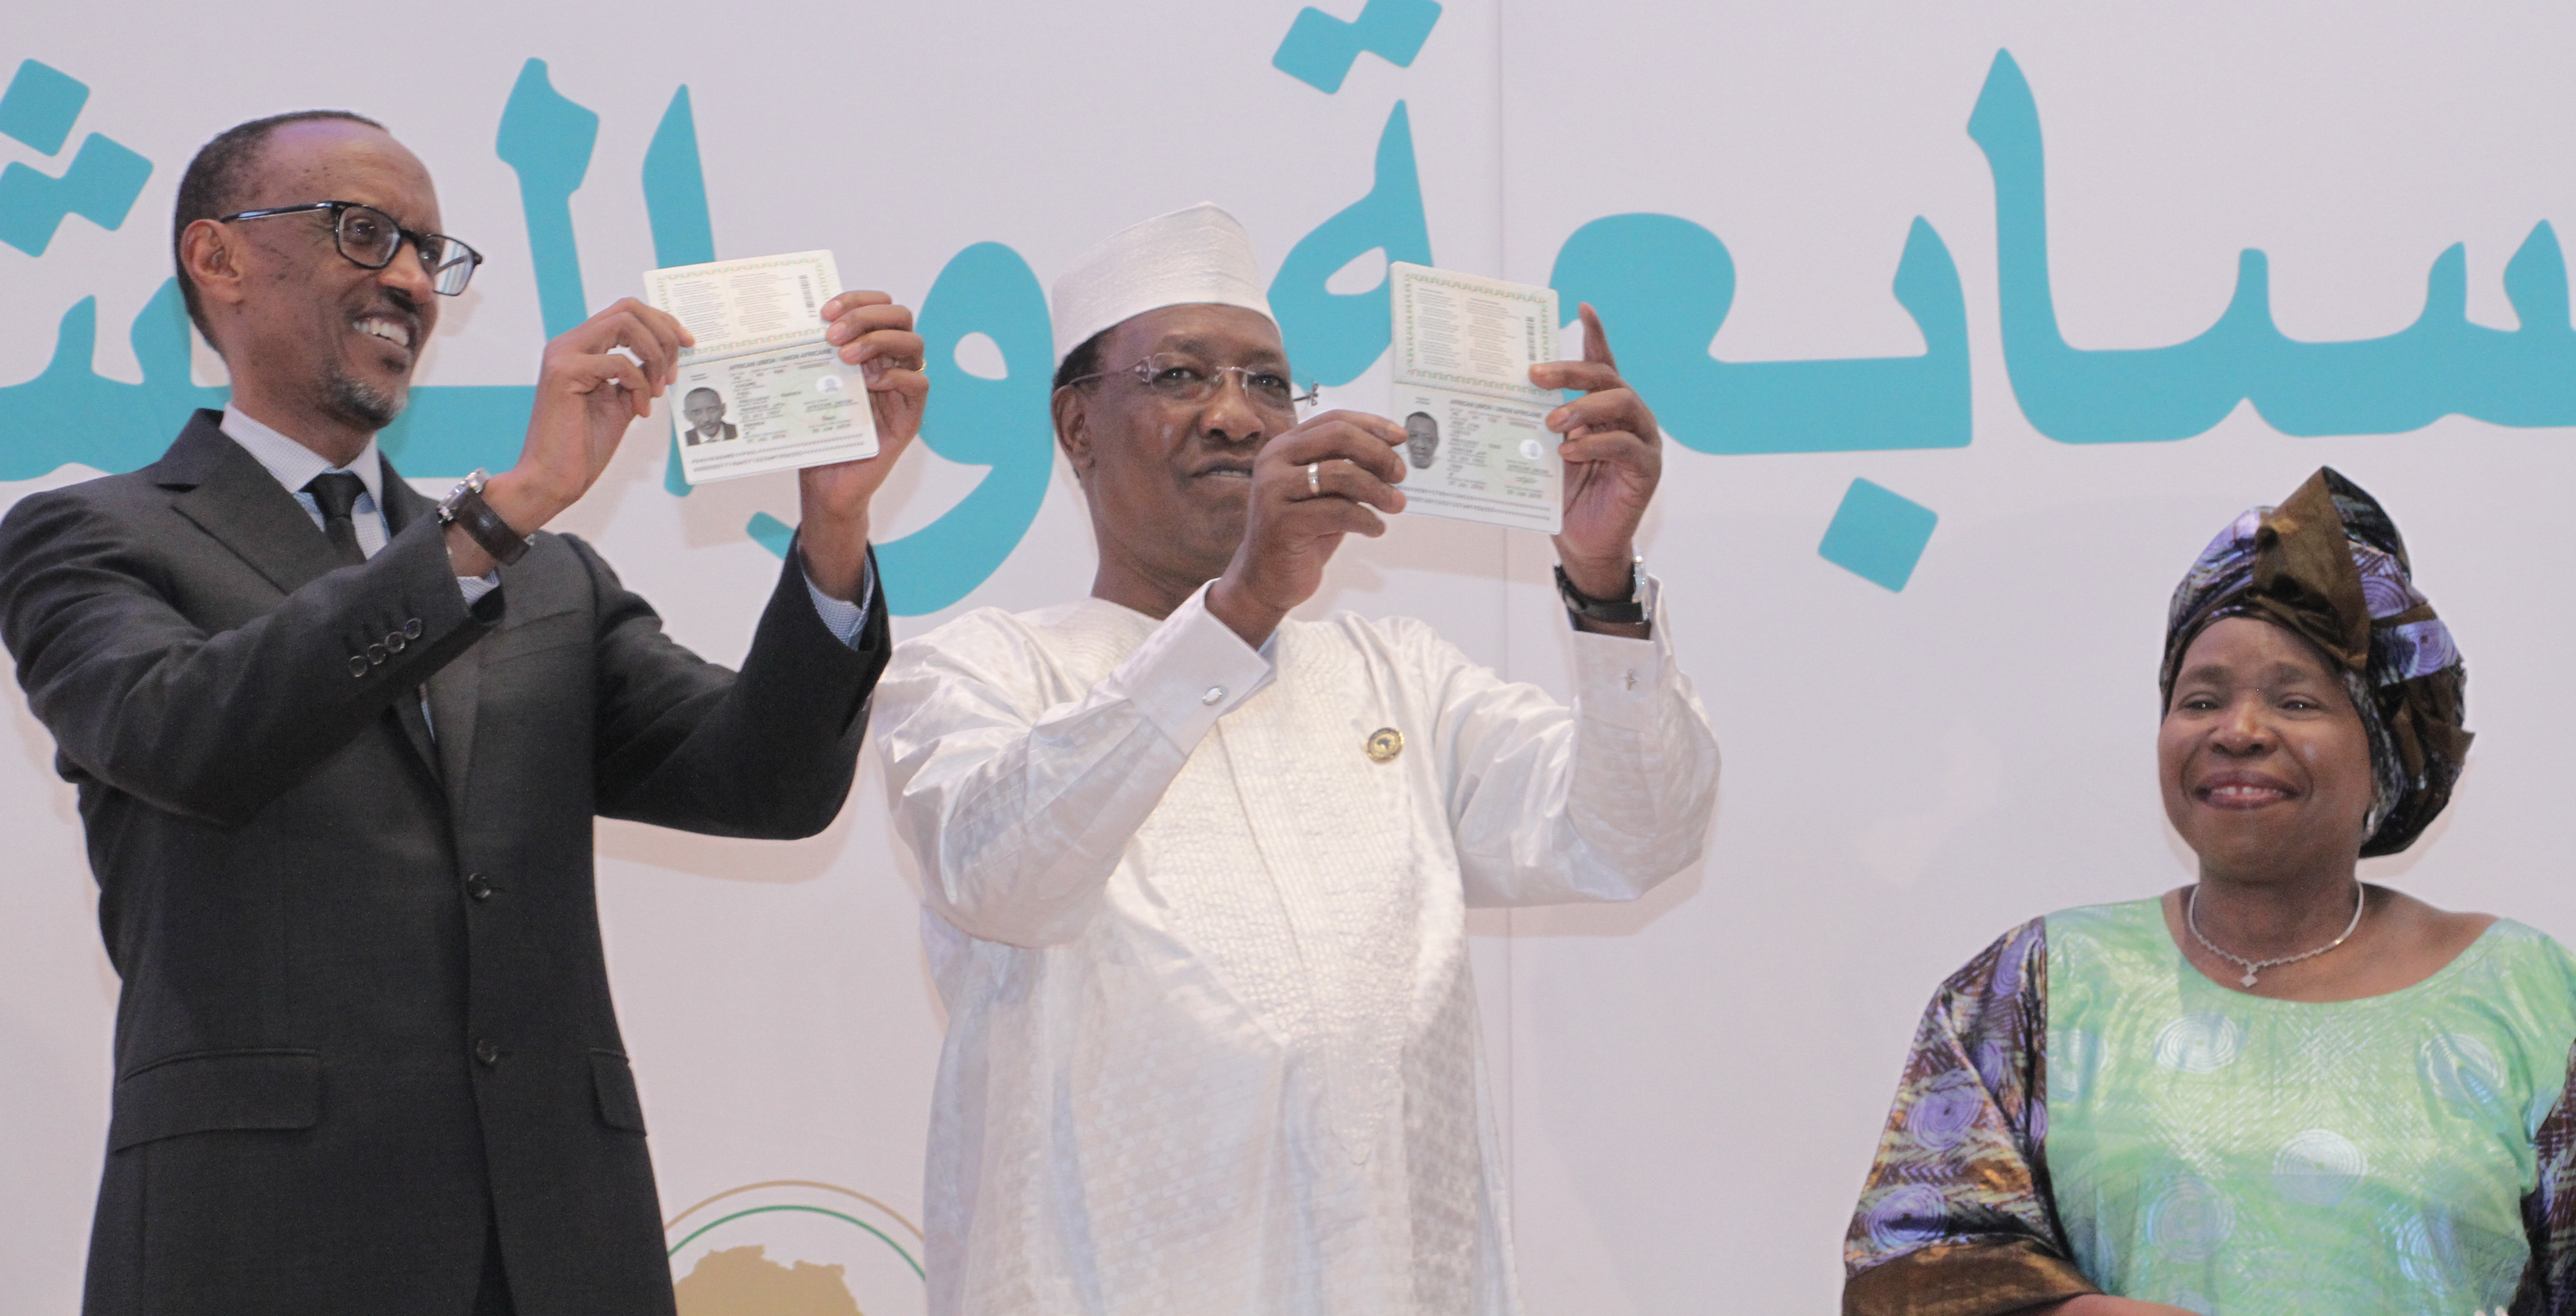 Rwandan President Paul Kagame and Chadian President Idriss Déby, flanked by African Union Commission Chairperson Nkosazana Dlamini-Zuma, show off their new pan-African passports at the AU summit in Kigali in July 2016. Photo: African Union